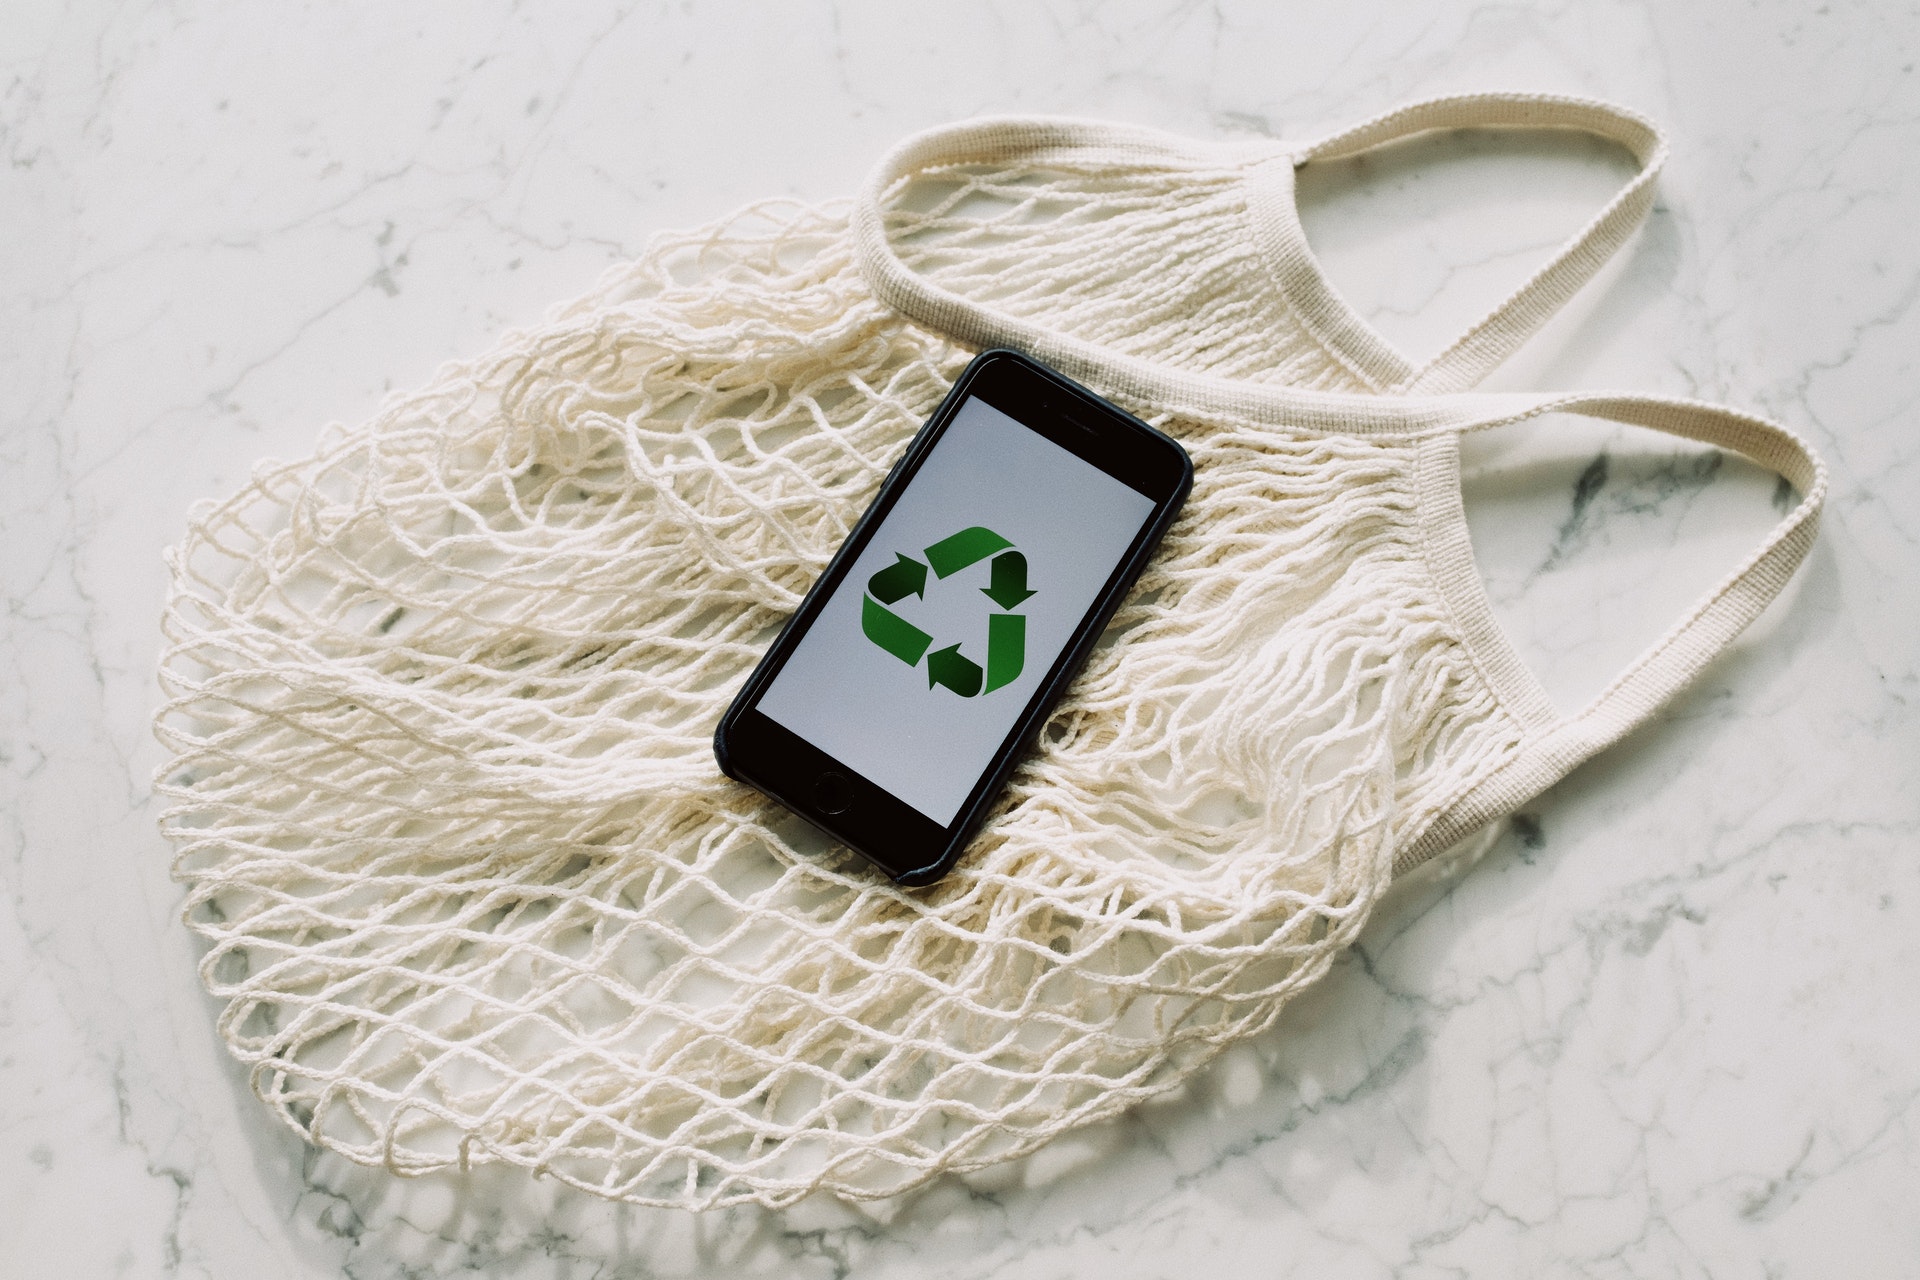 reusable bag and phone with recycling symbol